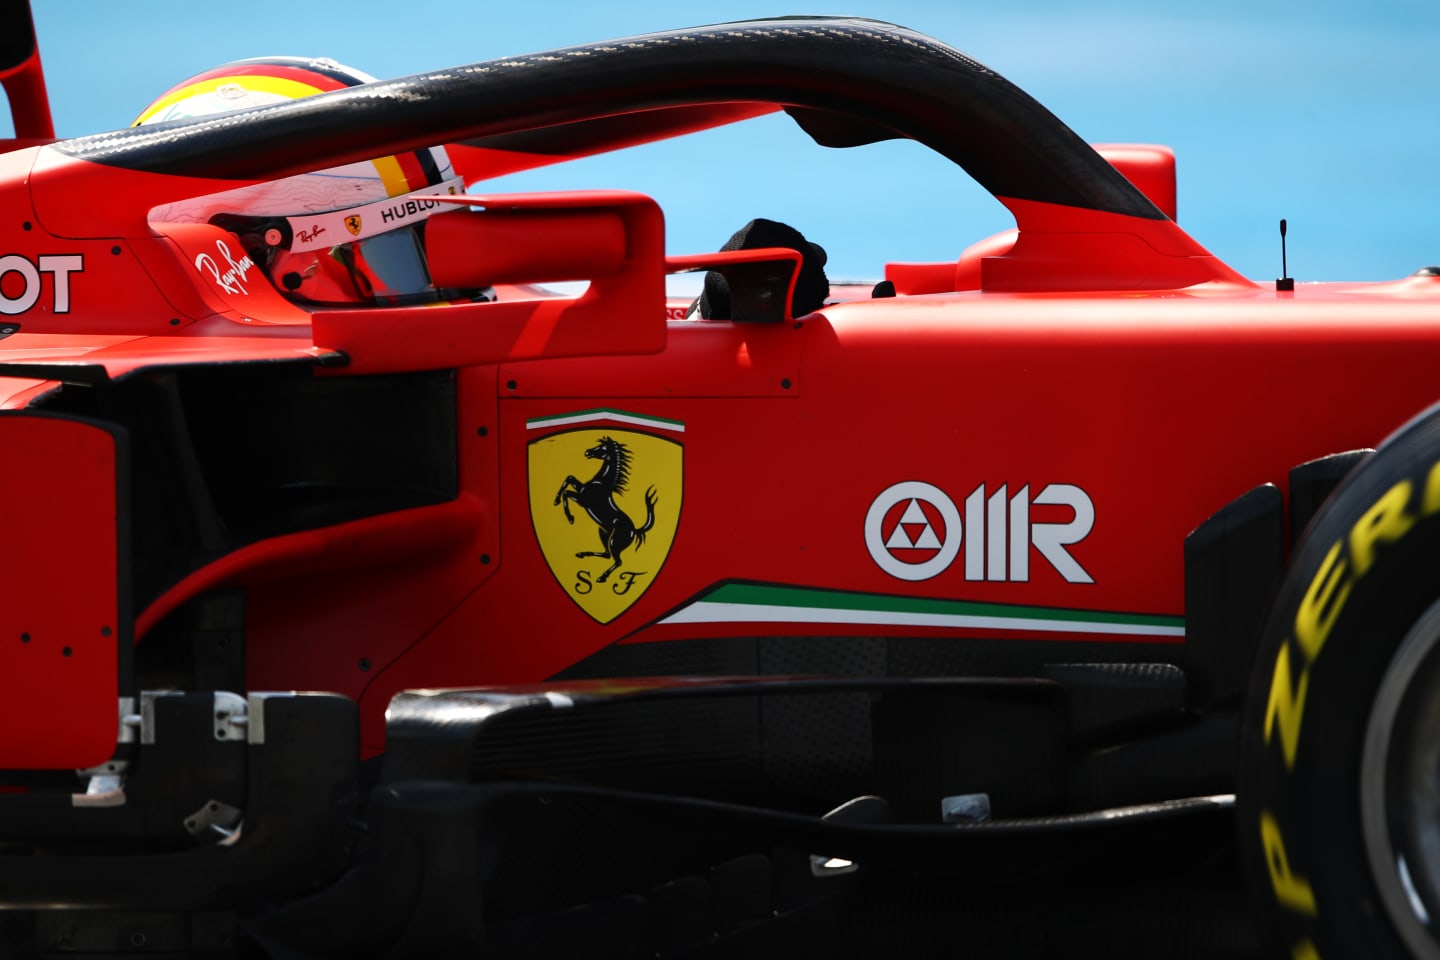 SPIELBERG, AUSTRIA - JULY 10: Sebastian Vettel of Germany driving the (5) Scuderia Ferrari SF1000 on track during practice for the F1 Grand Prix of Styria at Red Bull Ring on July 10, 2020 in Spielberg, Austria. (Photo by Bryn Lennon/Getty Images)